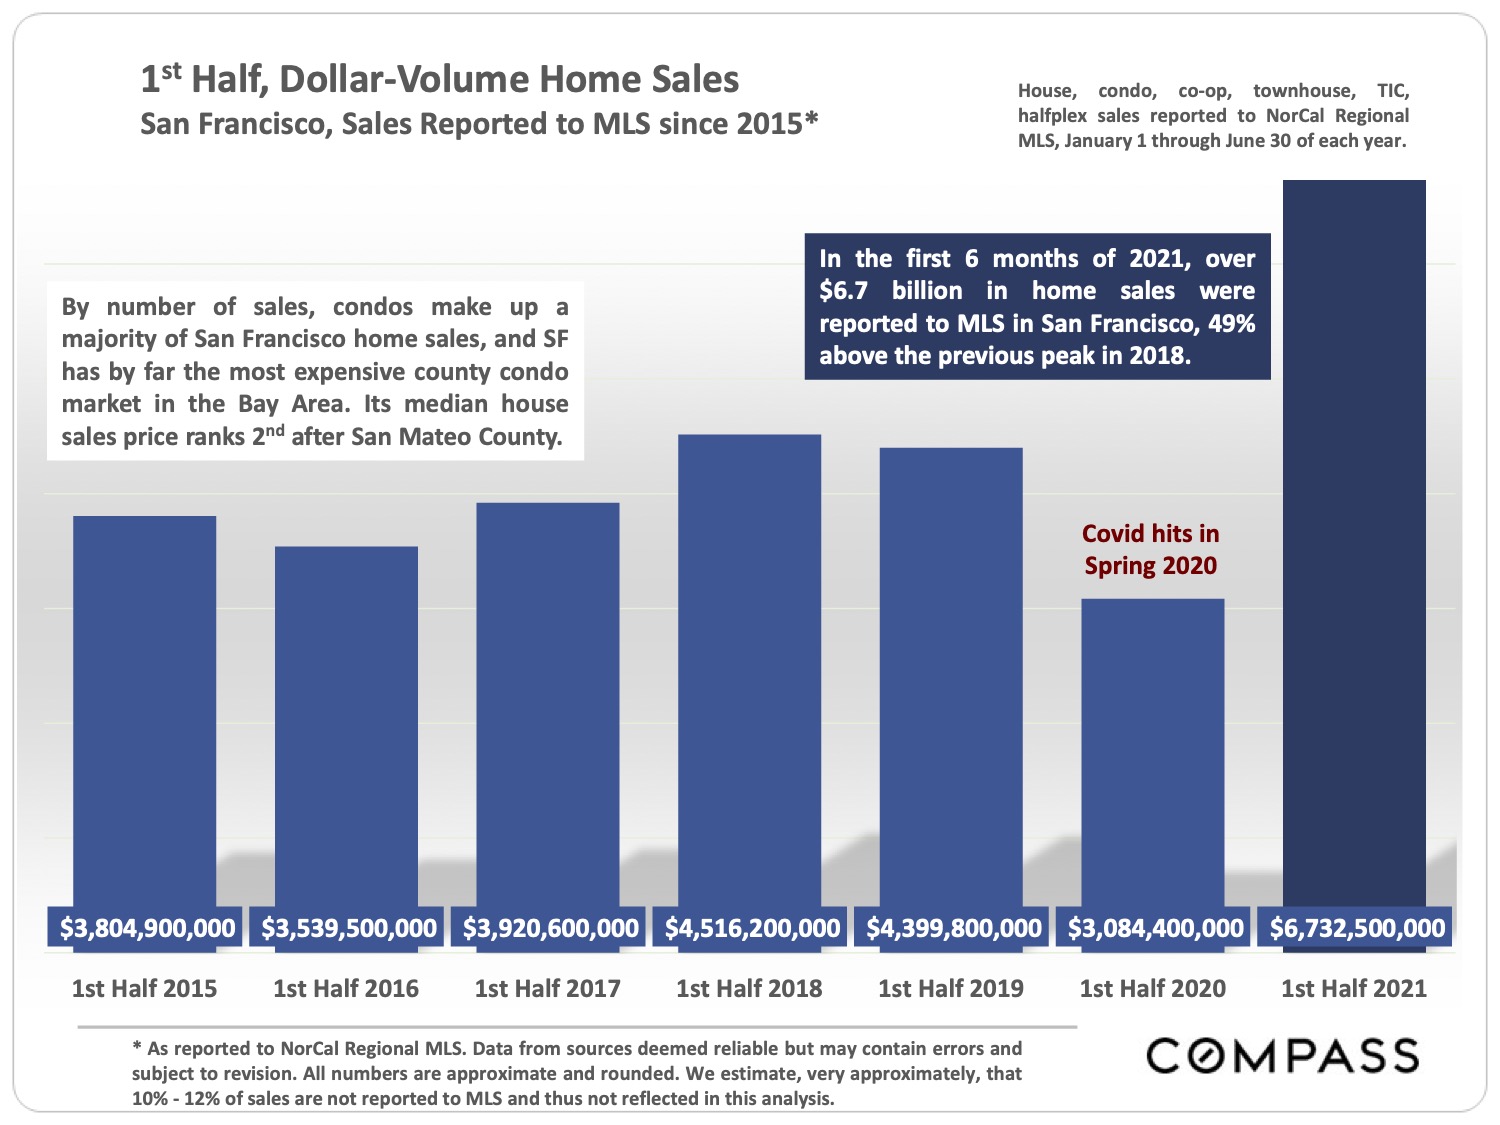 Image of 1st Half, Dollar Volume Home Sales San Francisco Sales Reported to MLS since 2015